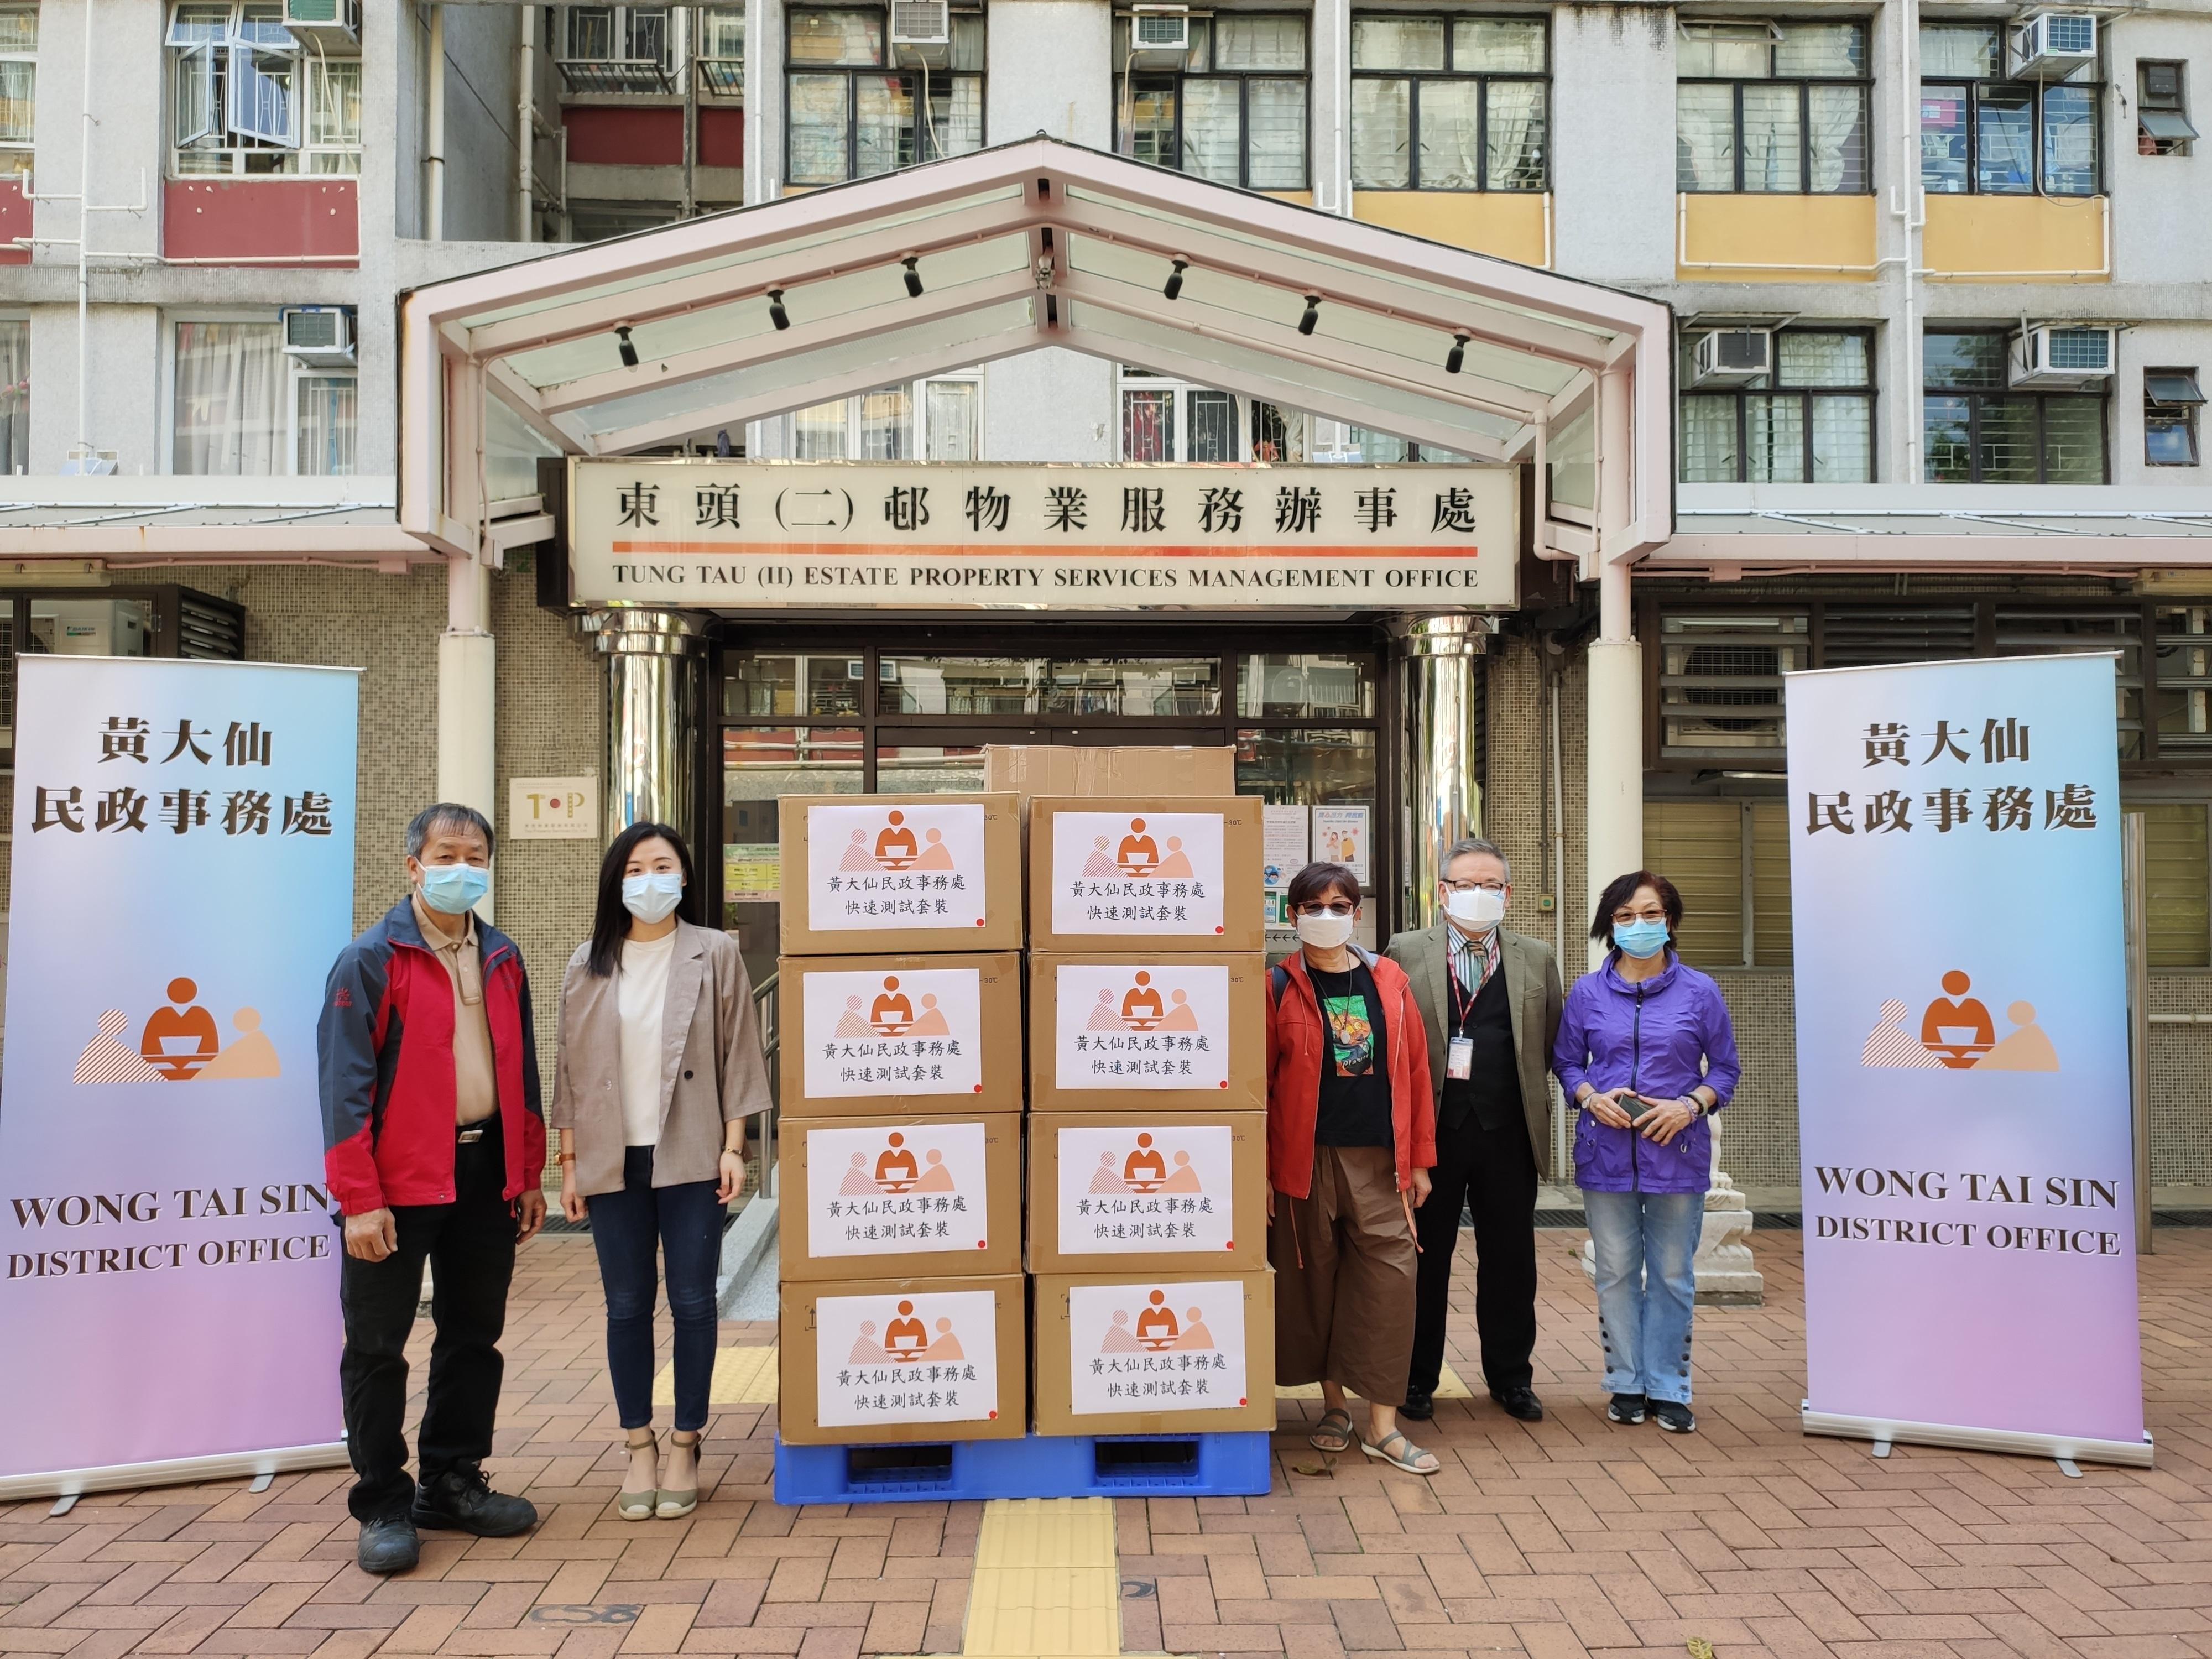 The Wong Tai Sin District Office today (March 4) distributed COVID-19 rapid test kits to households, cleansing workers and property management staff living and working in Tung Tau (II) Estate for voluntary testing through the property management company.